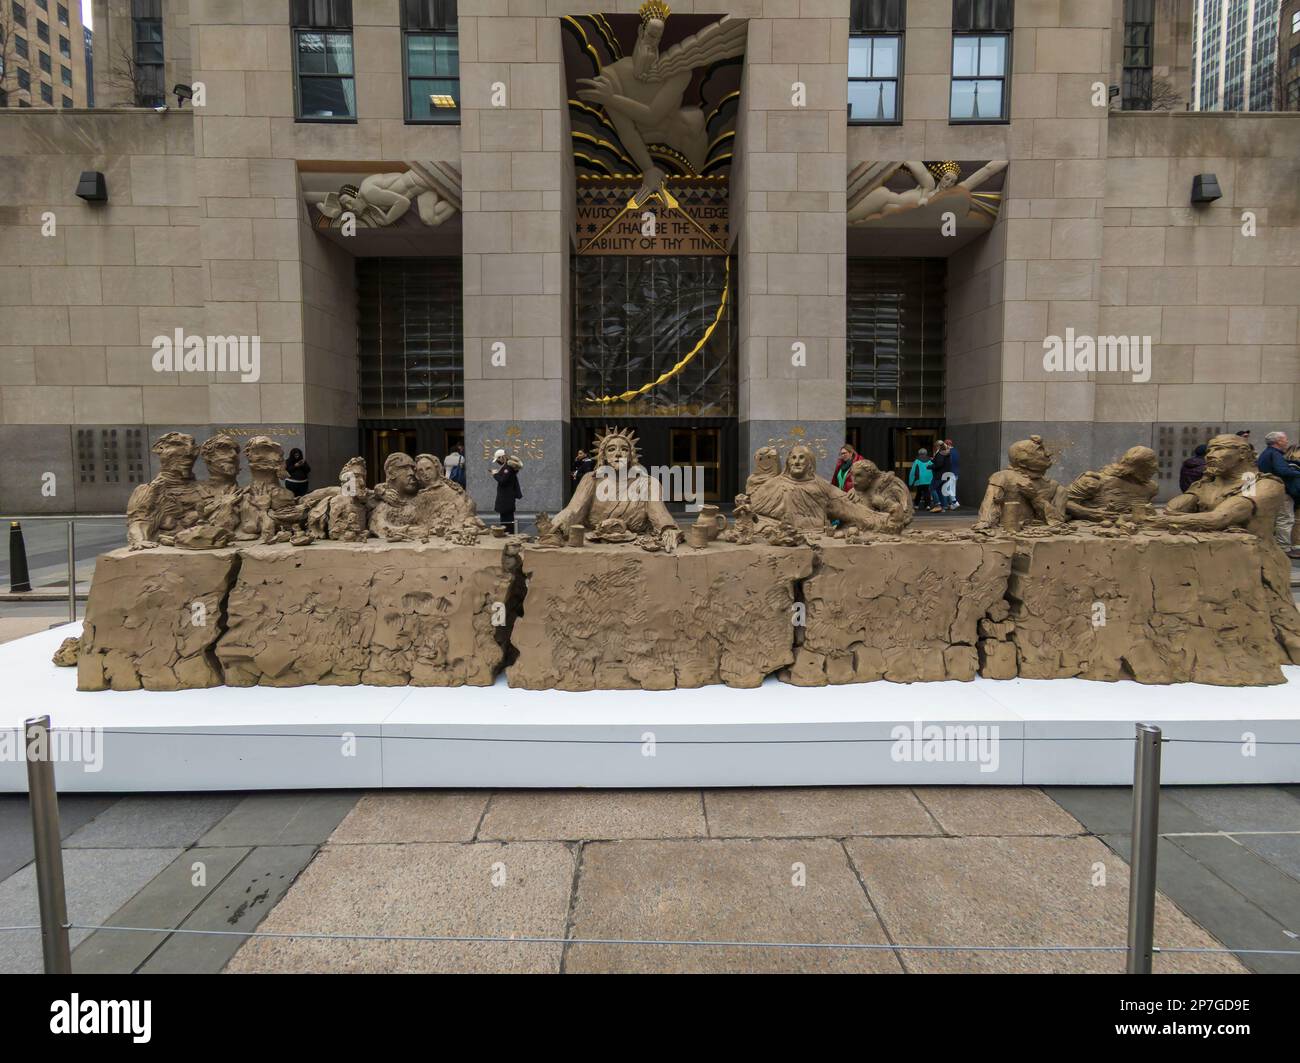 ArtistsÕ proof of Òlast supperÓ (2014) by Urs Fischer on display in Rockefeller Plaza in New York on Thursday, March 2, 2023. The sculpture of cast bronze and stainless steel armature is being auctioned by ChristieÕs auction house on March 9. The work is from the collection of Adam Lindemann. (©ÊRichard B. Levine) Stock Photo